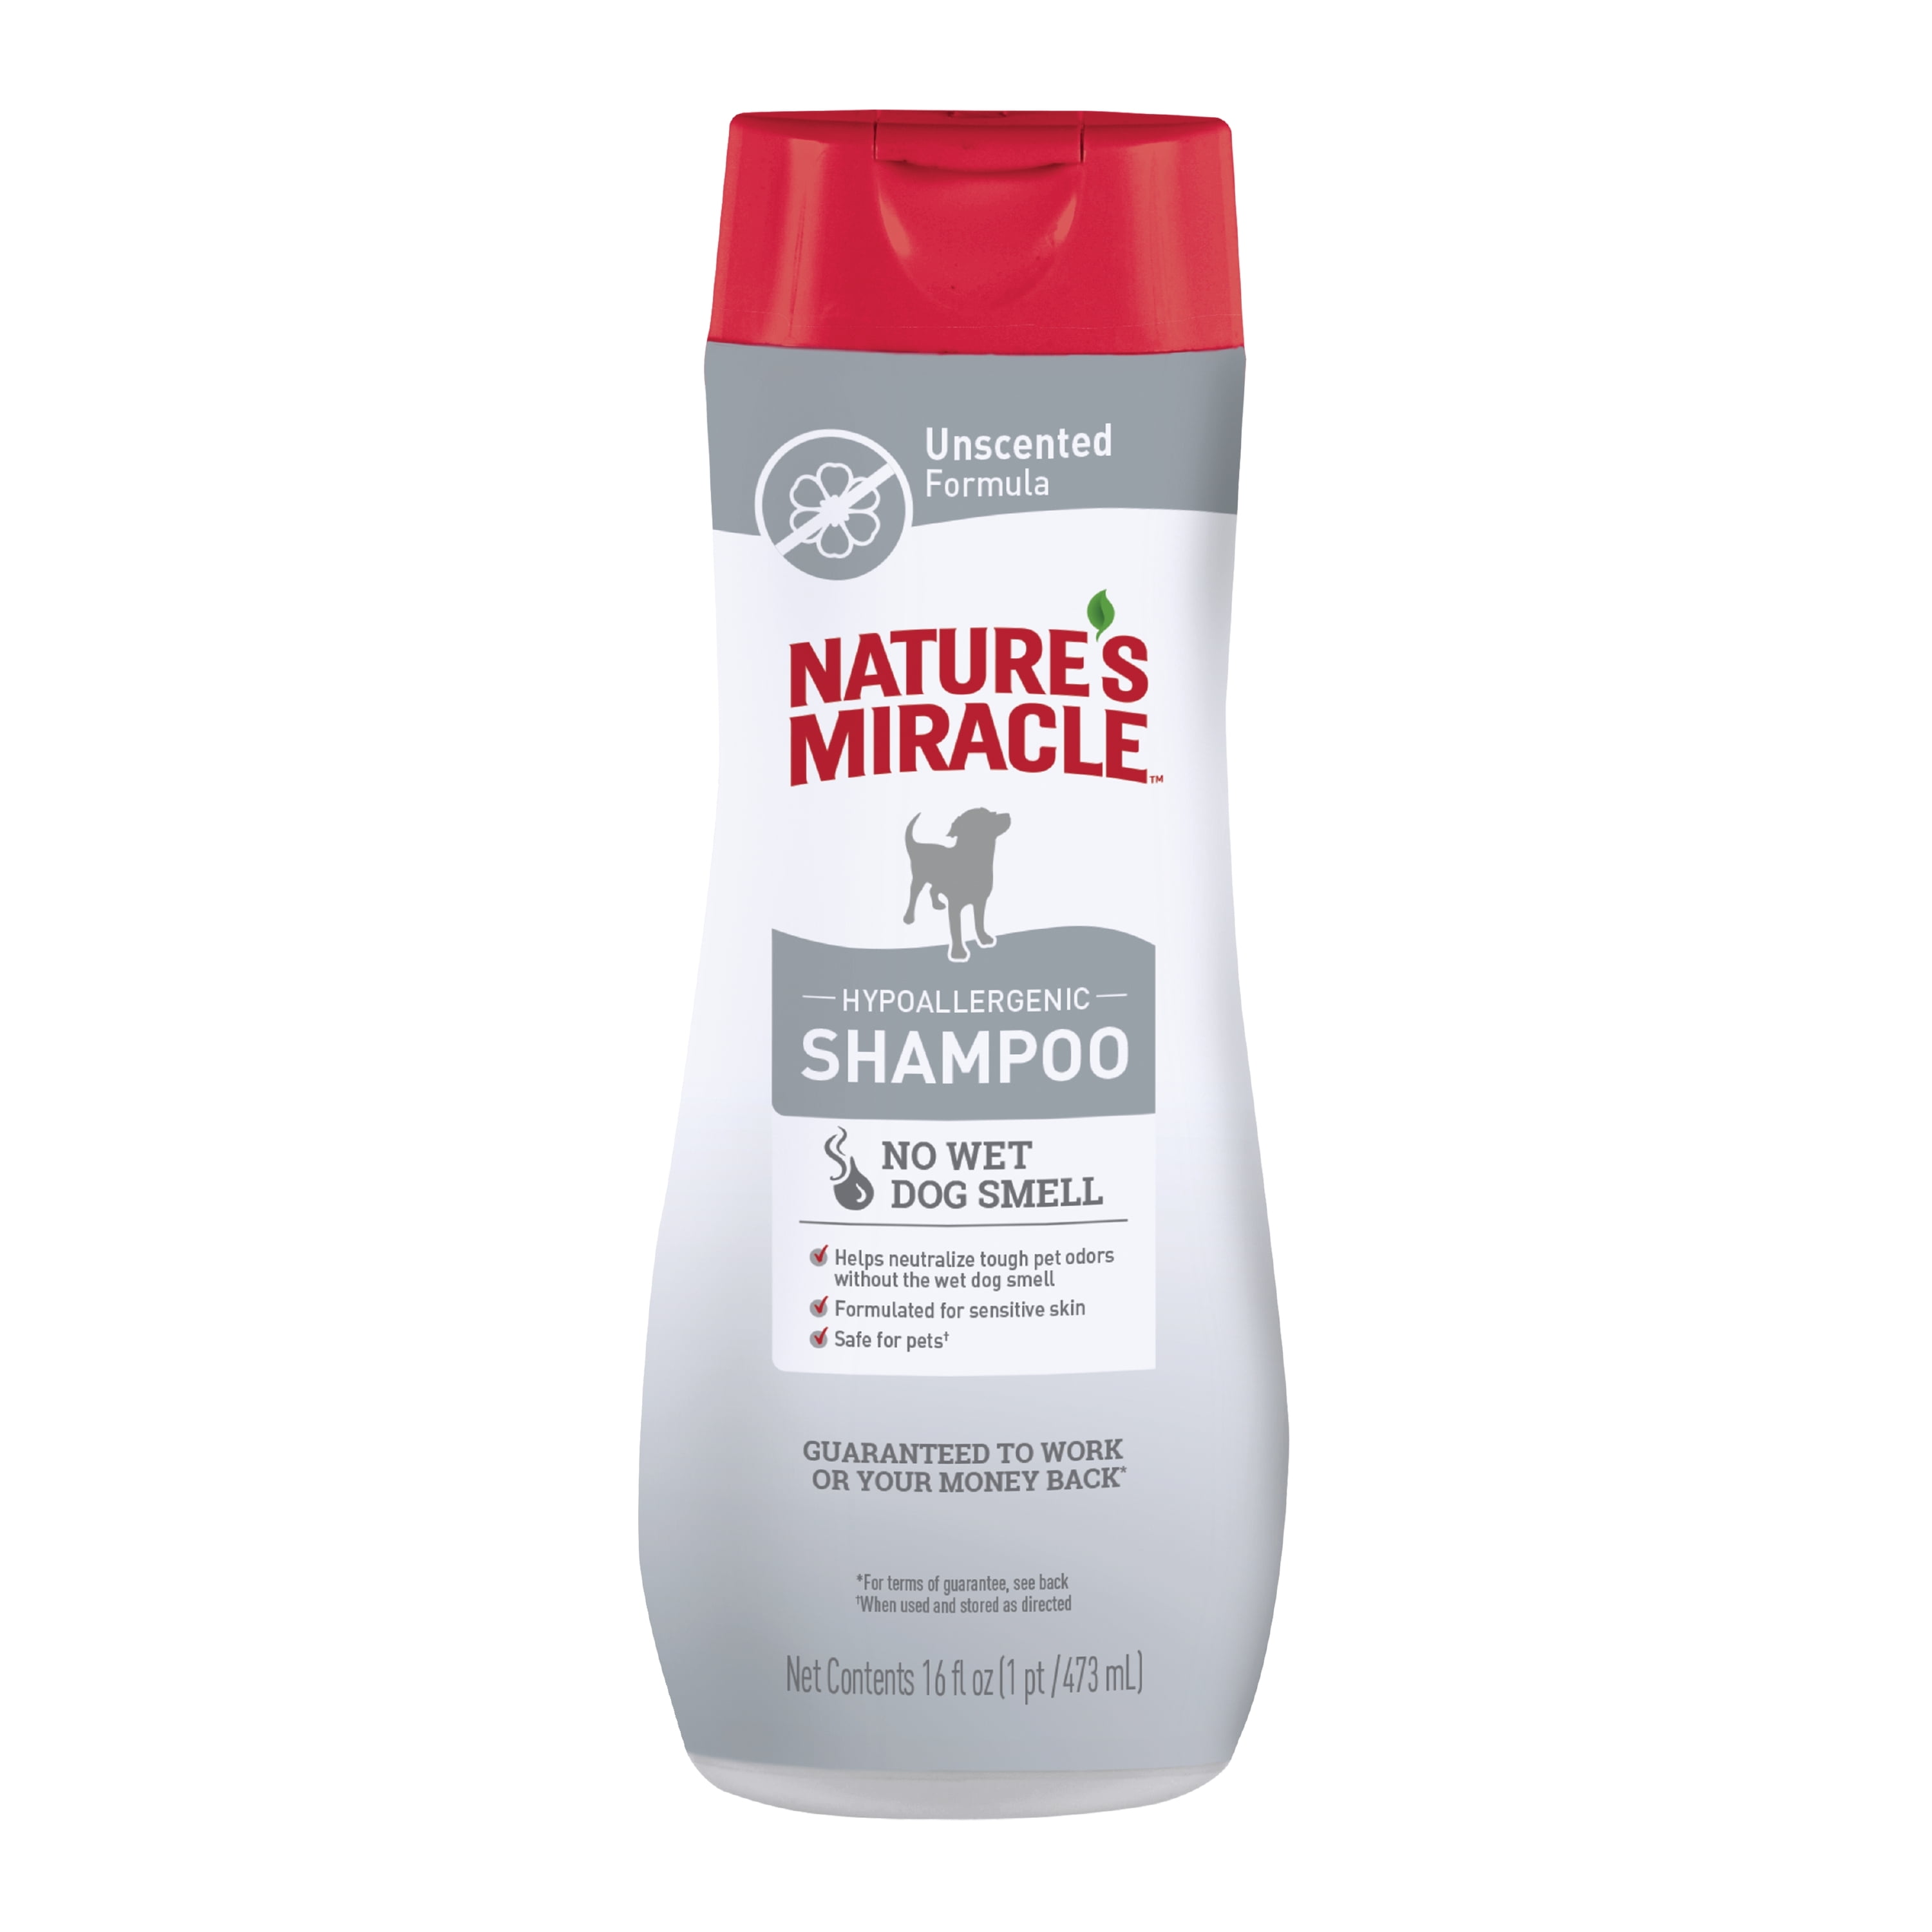 Nature's Miracle Nature’s Miracle Hypoallergenic Shampoo for Dogs, 16 Ounces, Unscented